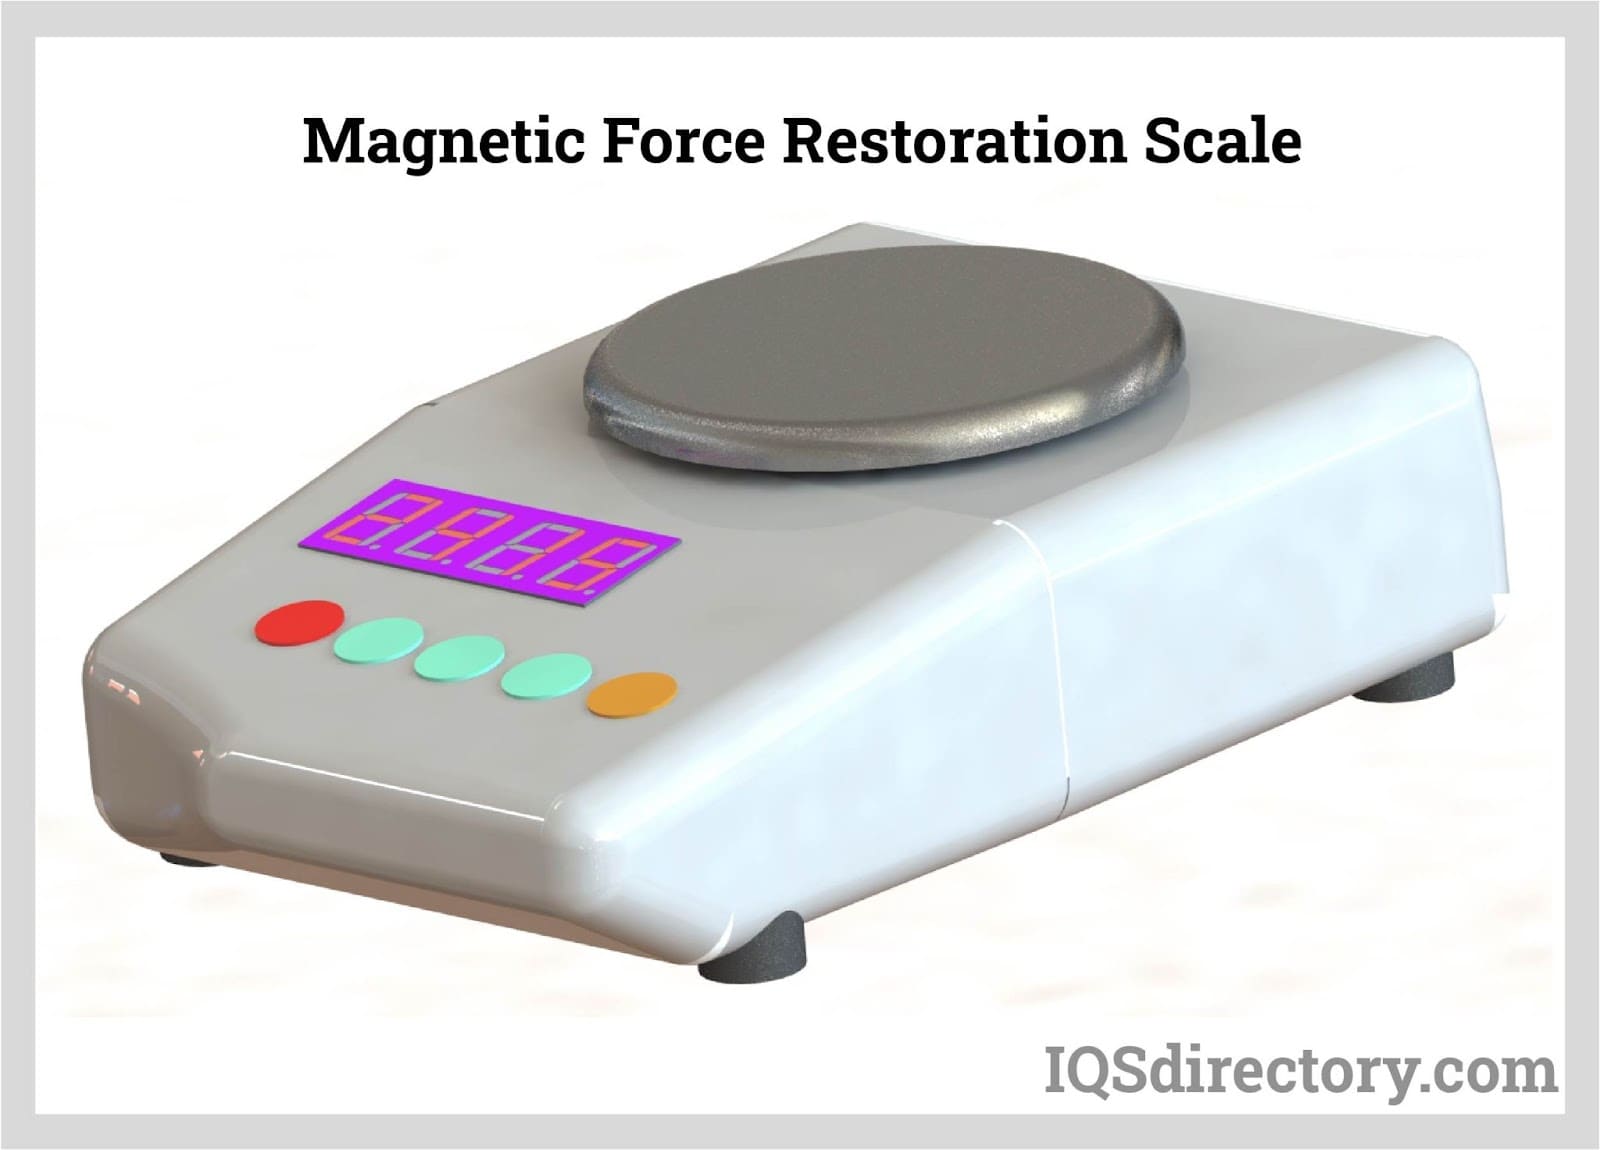 Magnetic Force Restoration Scale